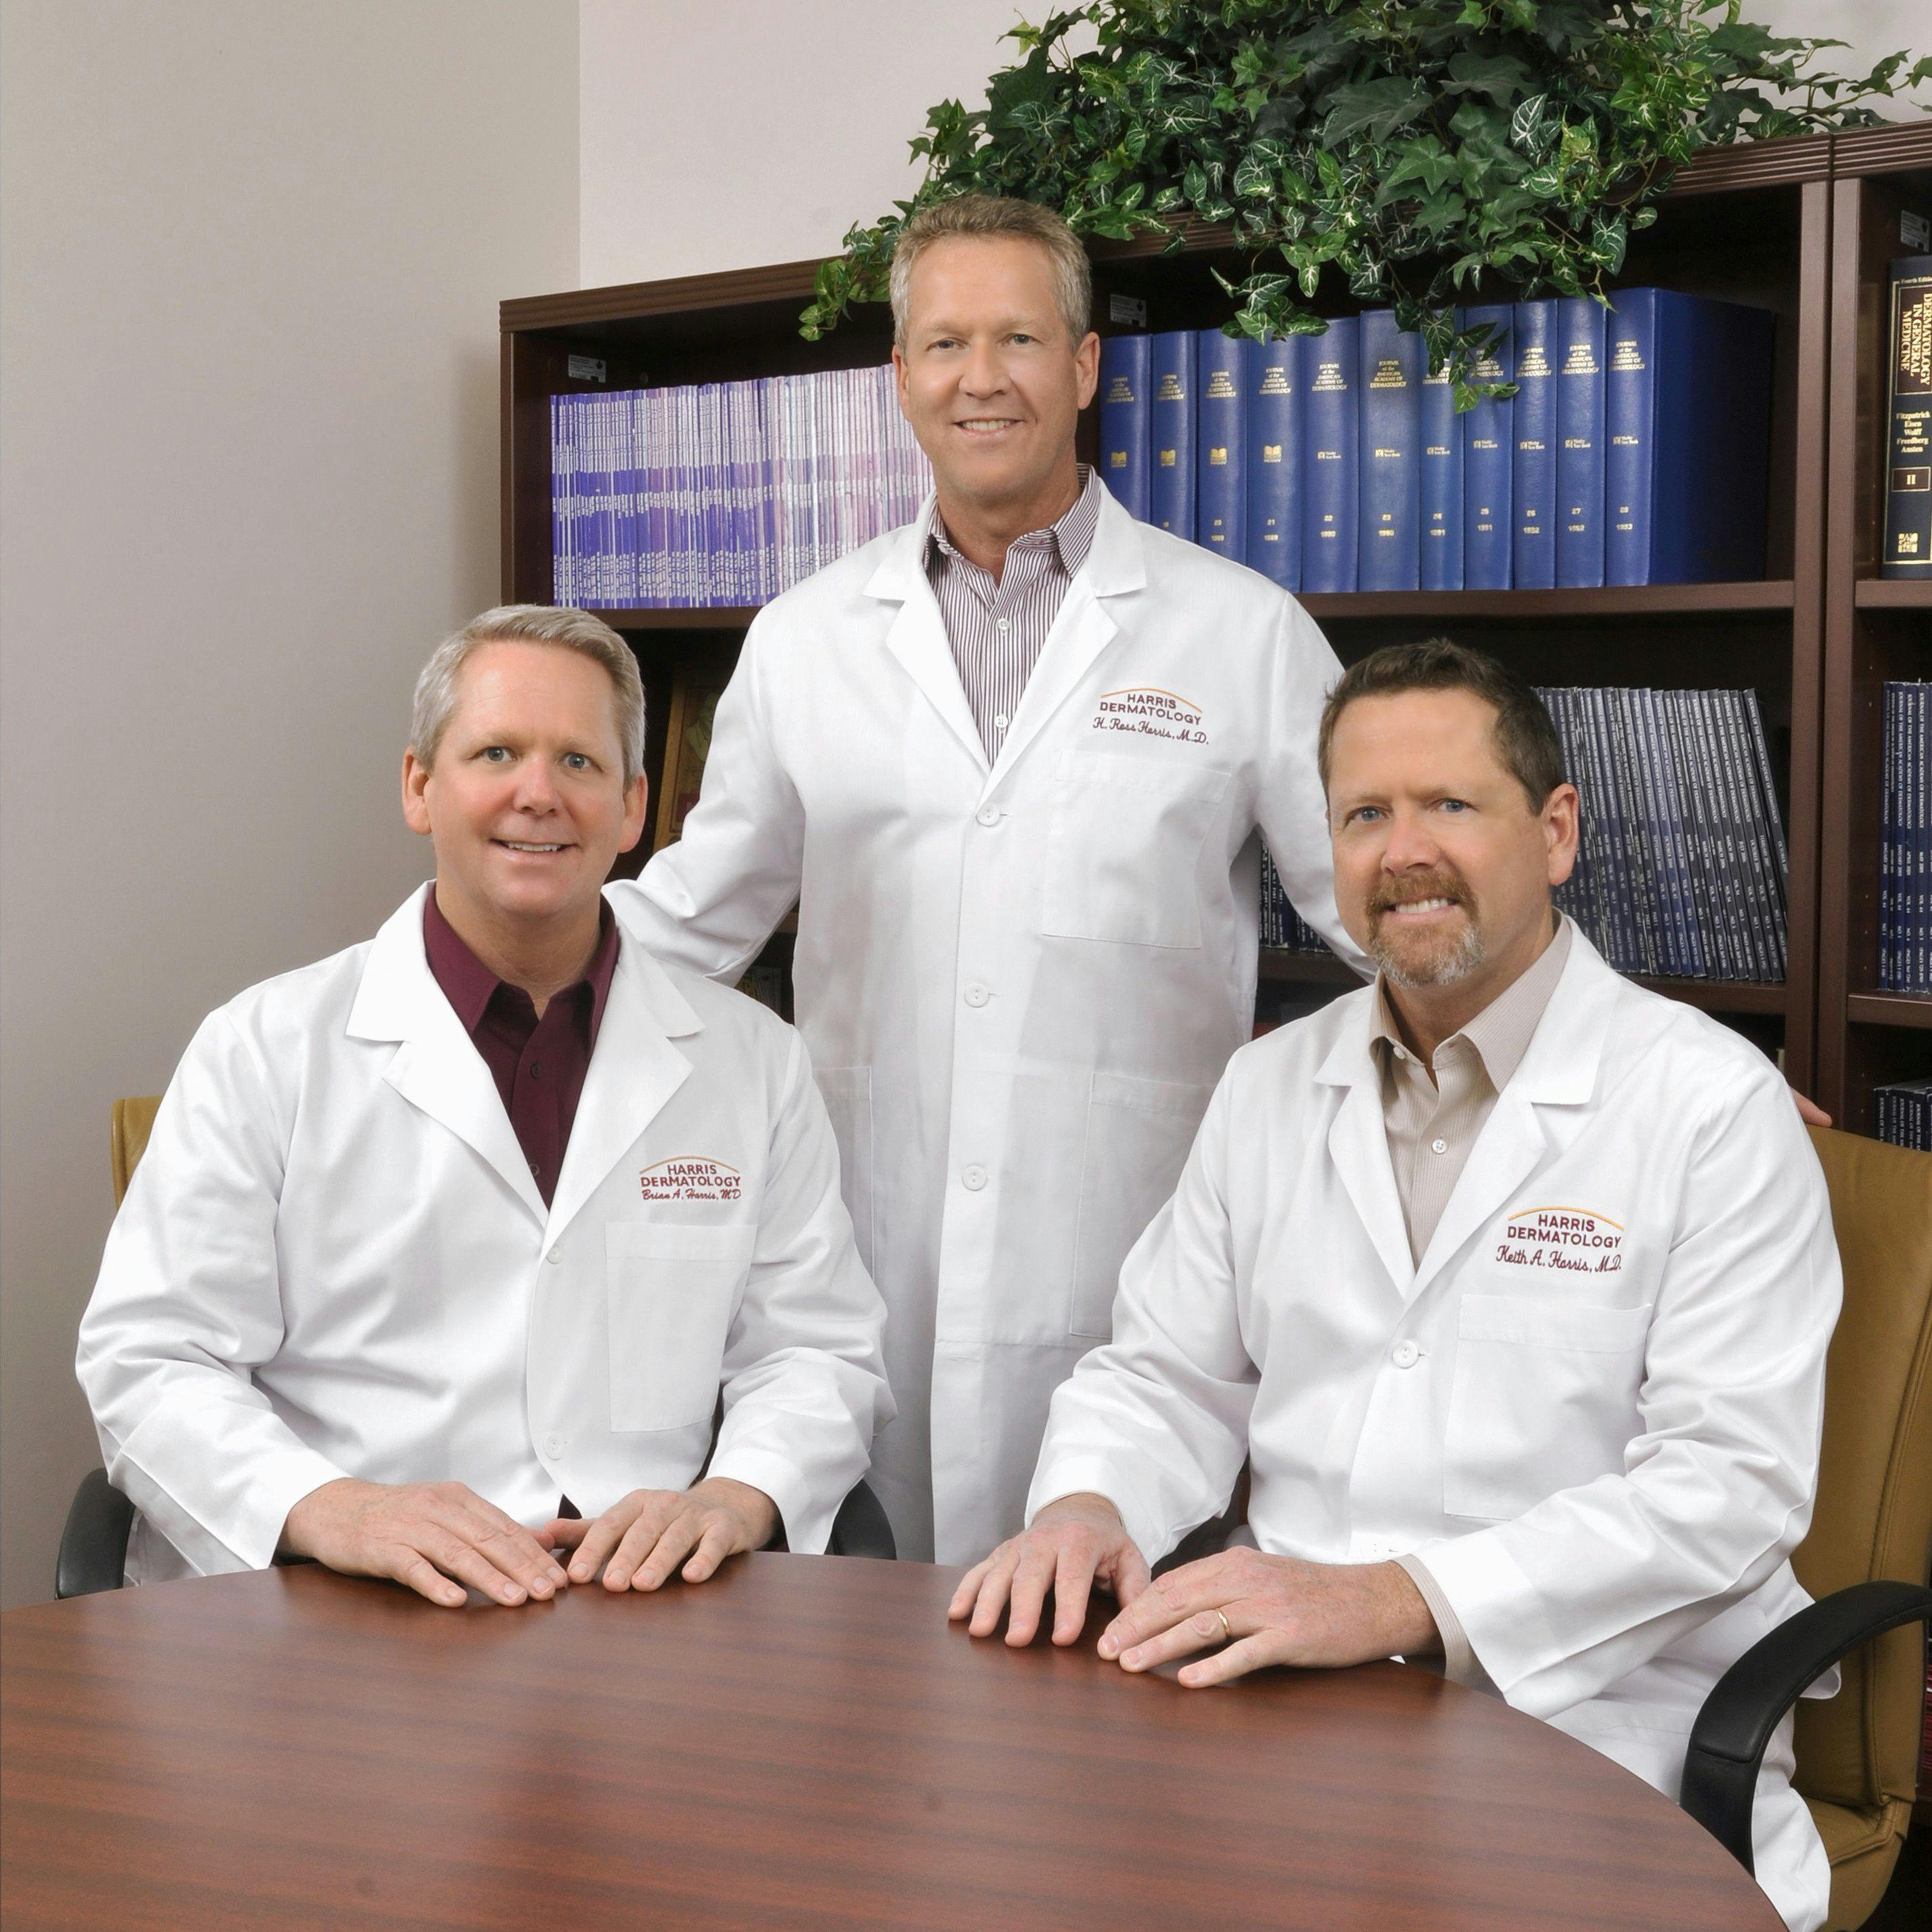 Left to right: Brian Harris, MD, H. Ross Harris, MD, Keith Harris, MD | Image Credit: Harris Dermatology